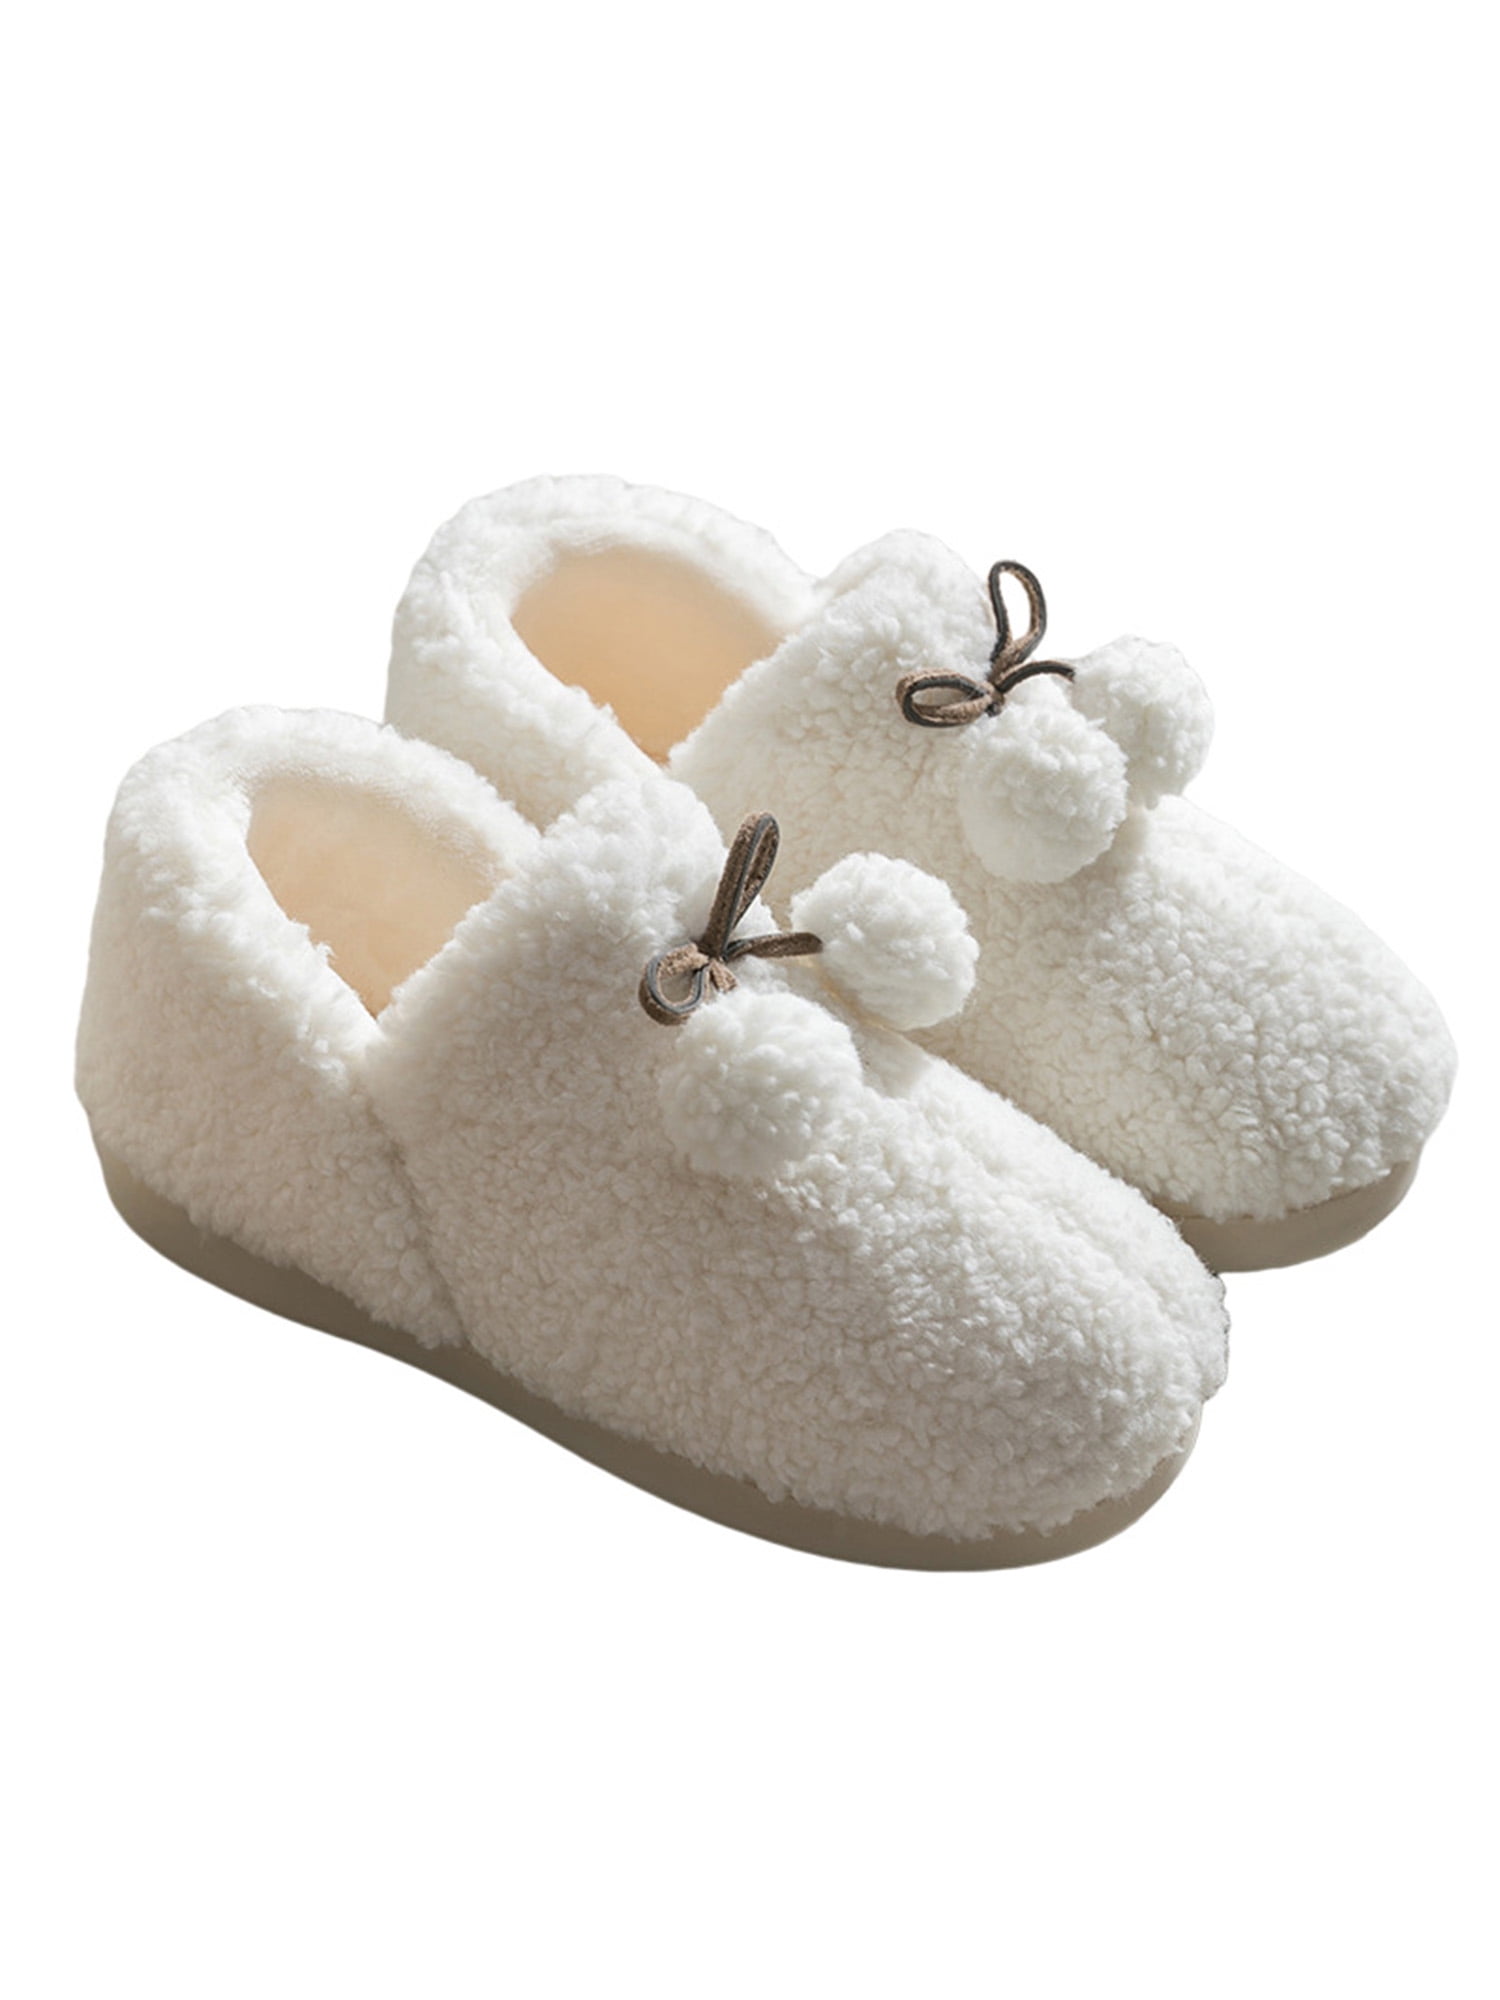 Girls Easy Touch Fastening Slipper Booties Kids Indoor Nursery Shoes Age Size 